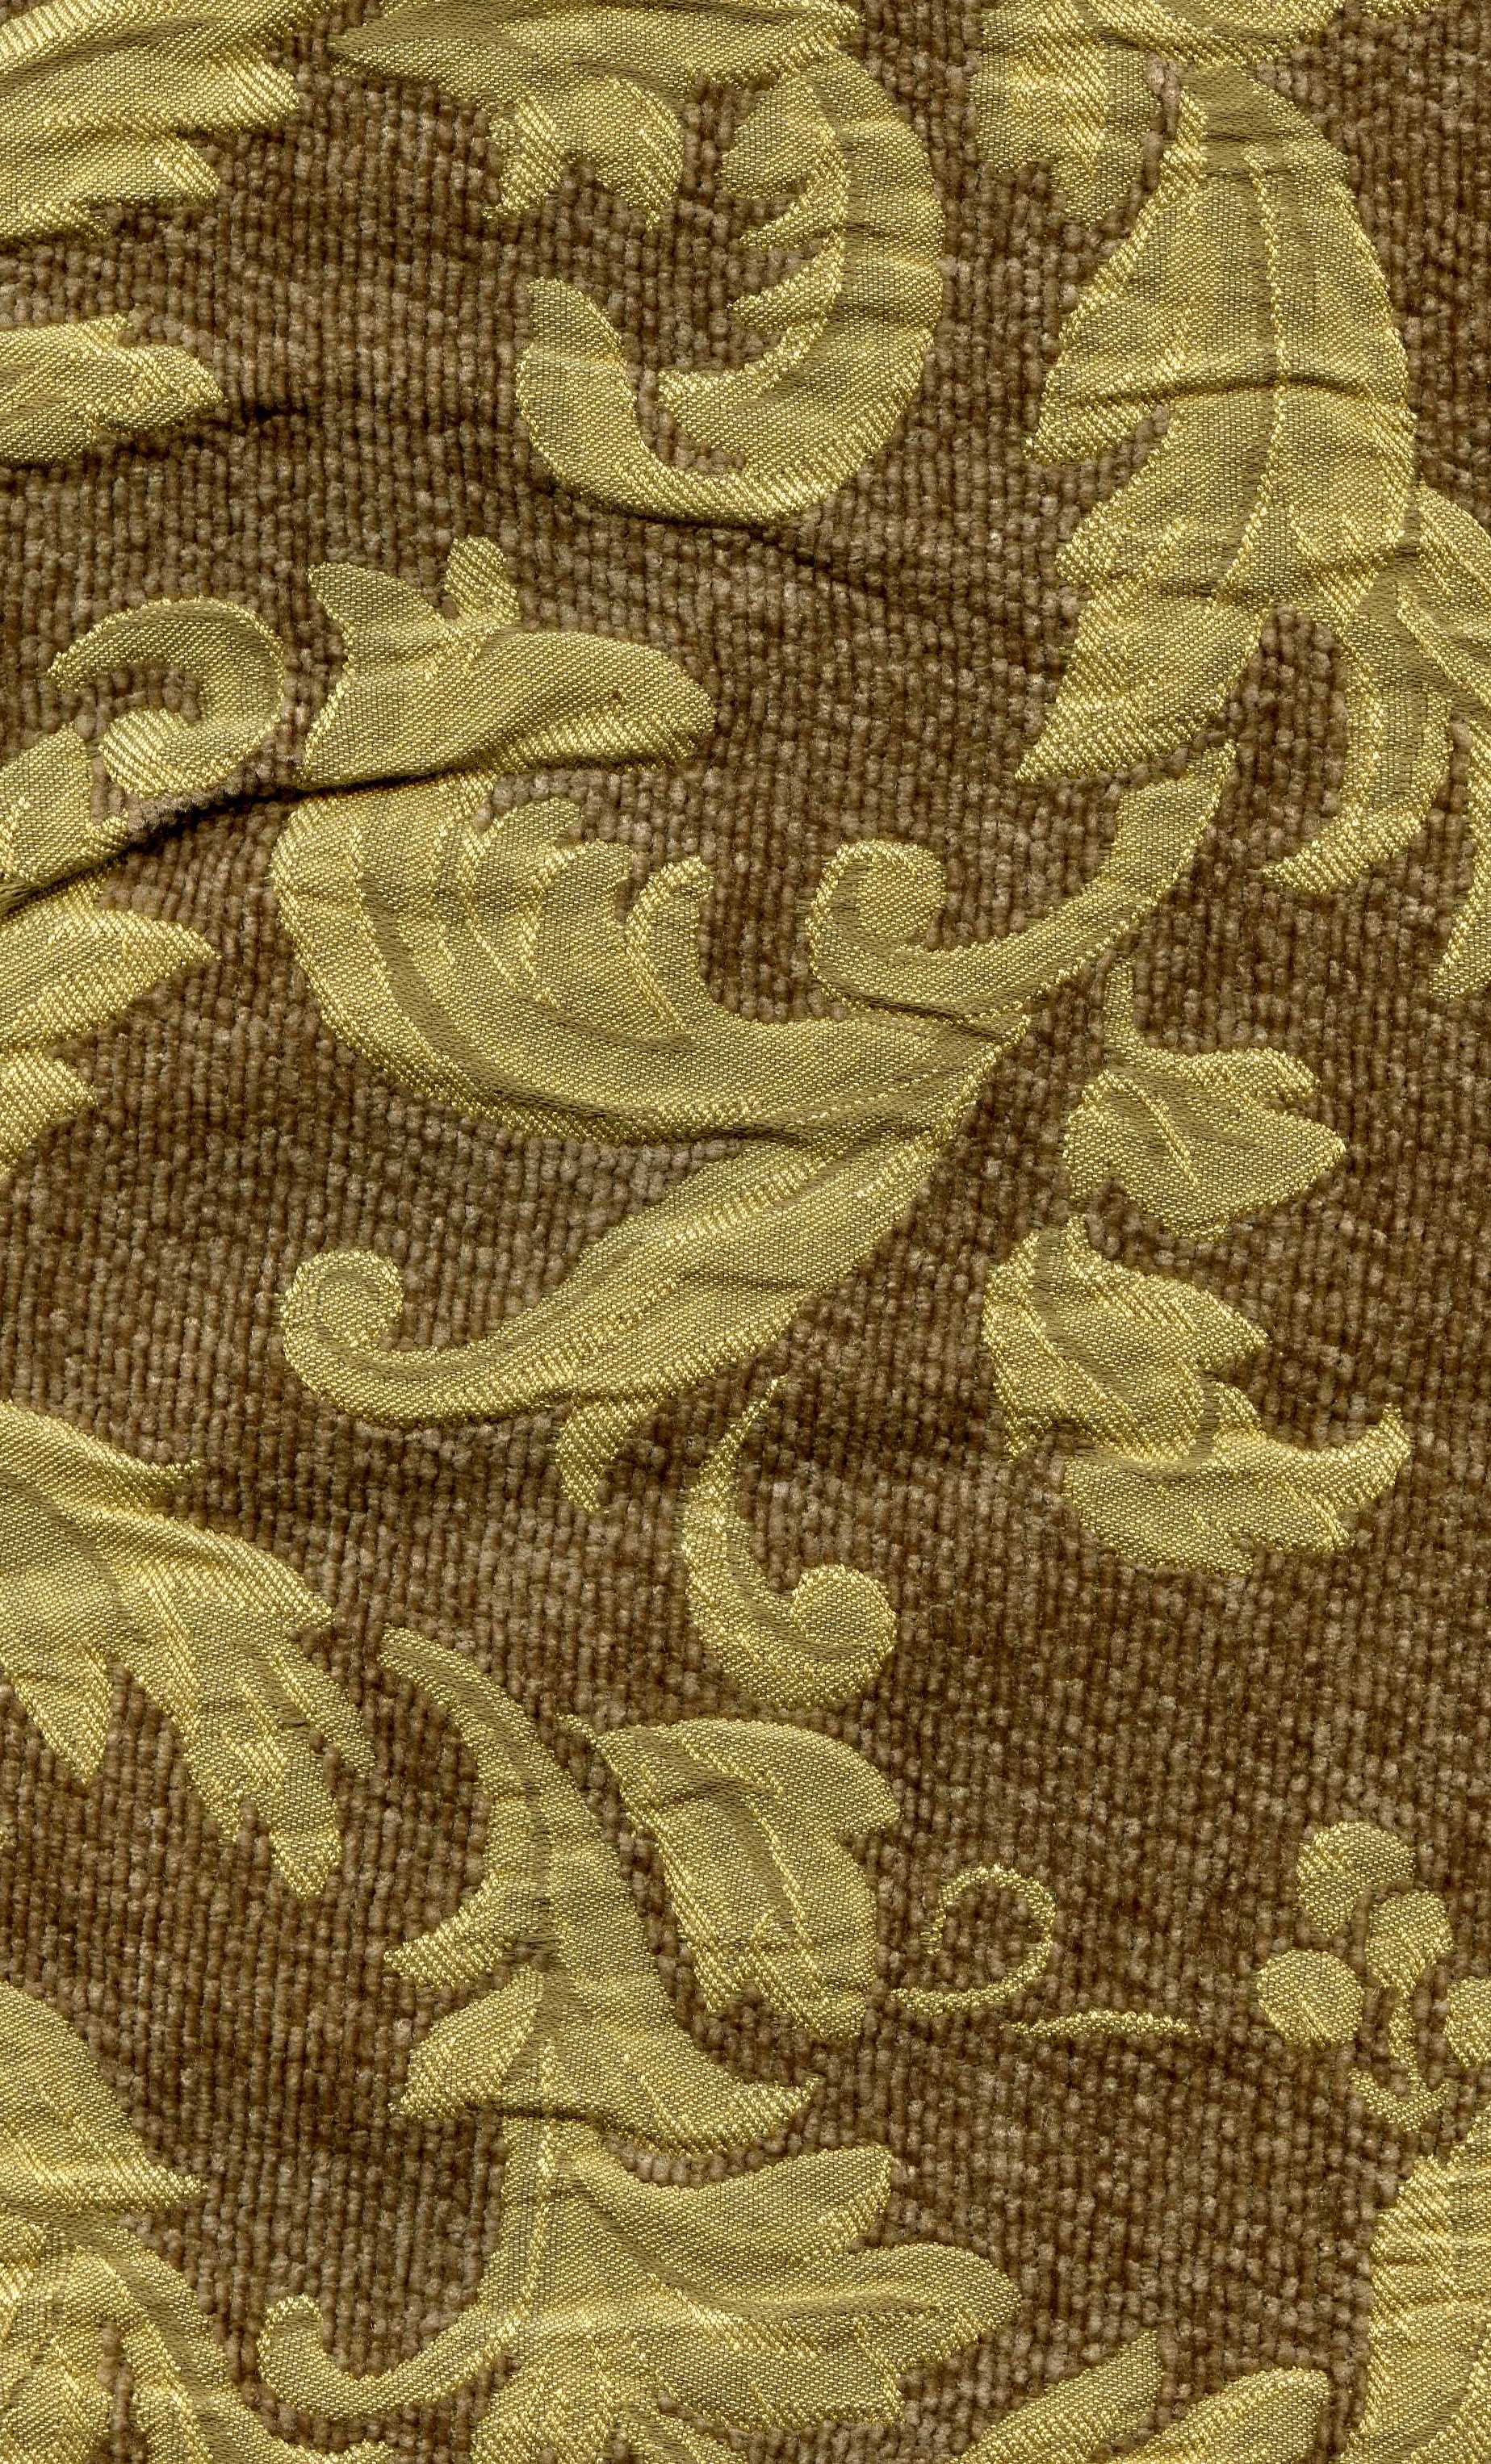 Light Yellow Leaves with Light Brown Background